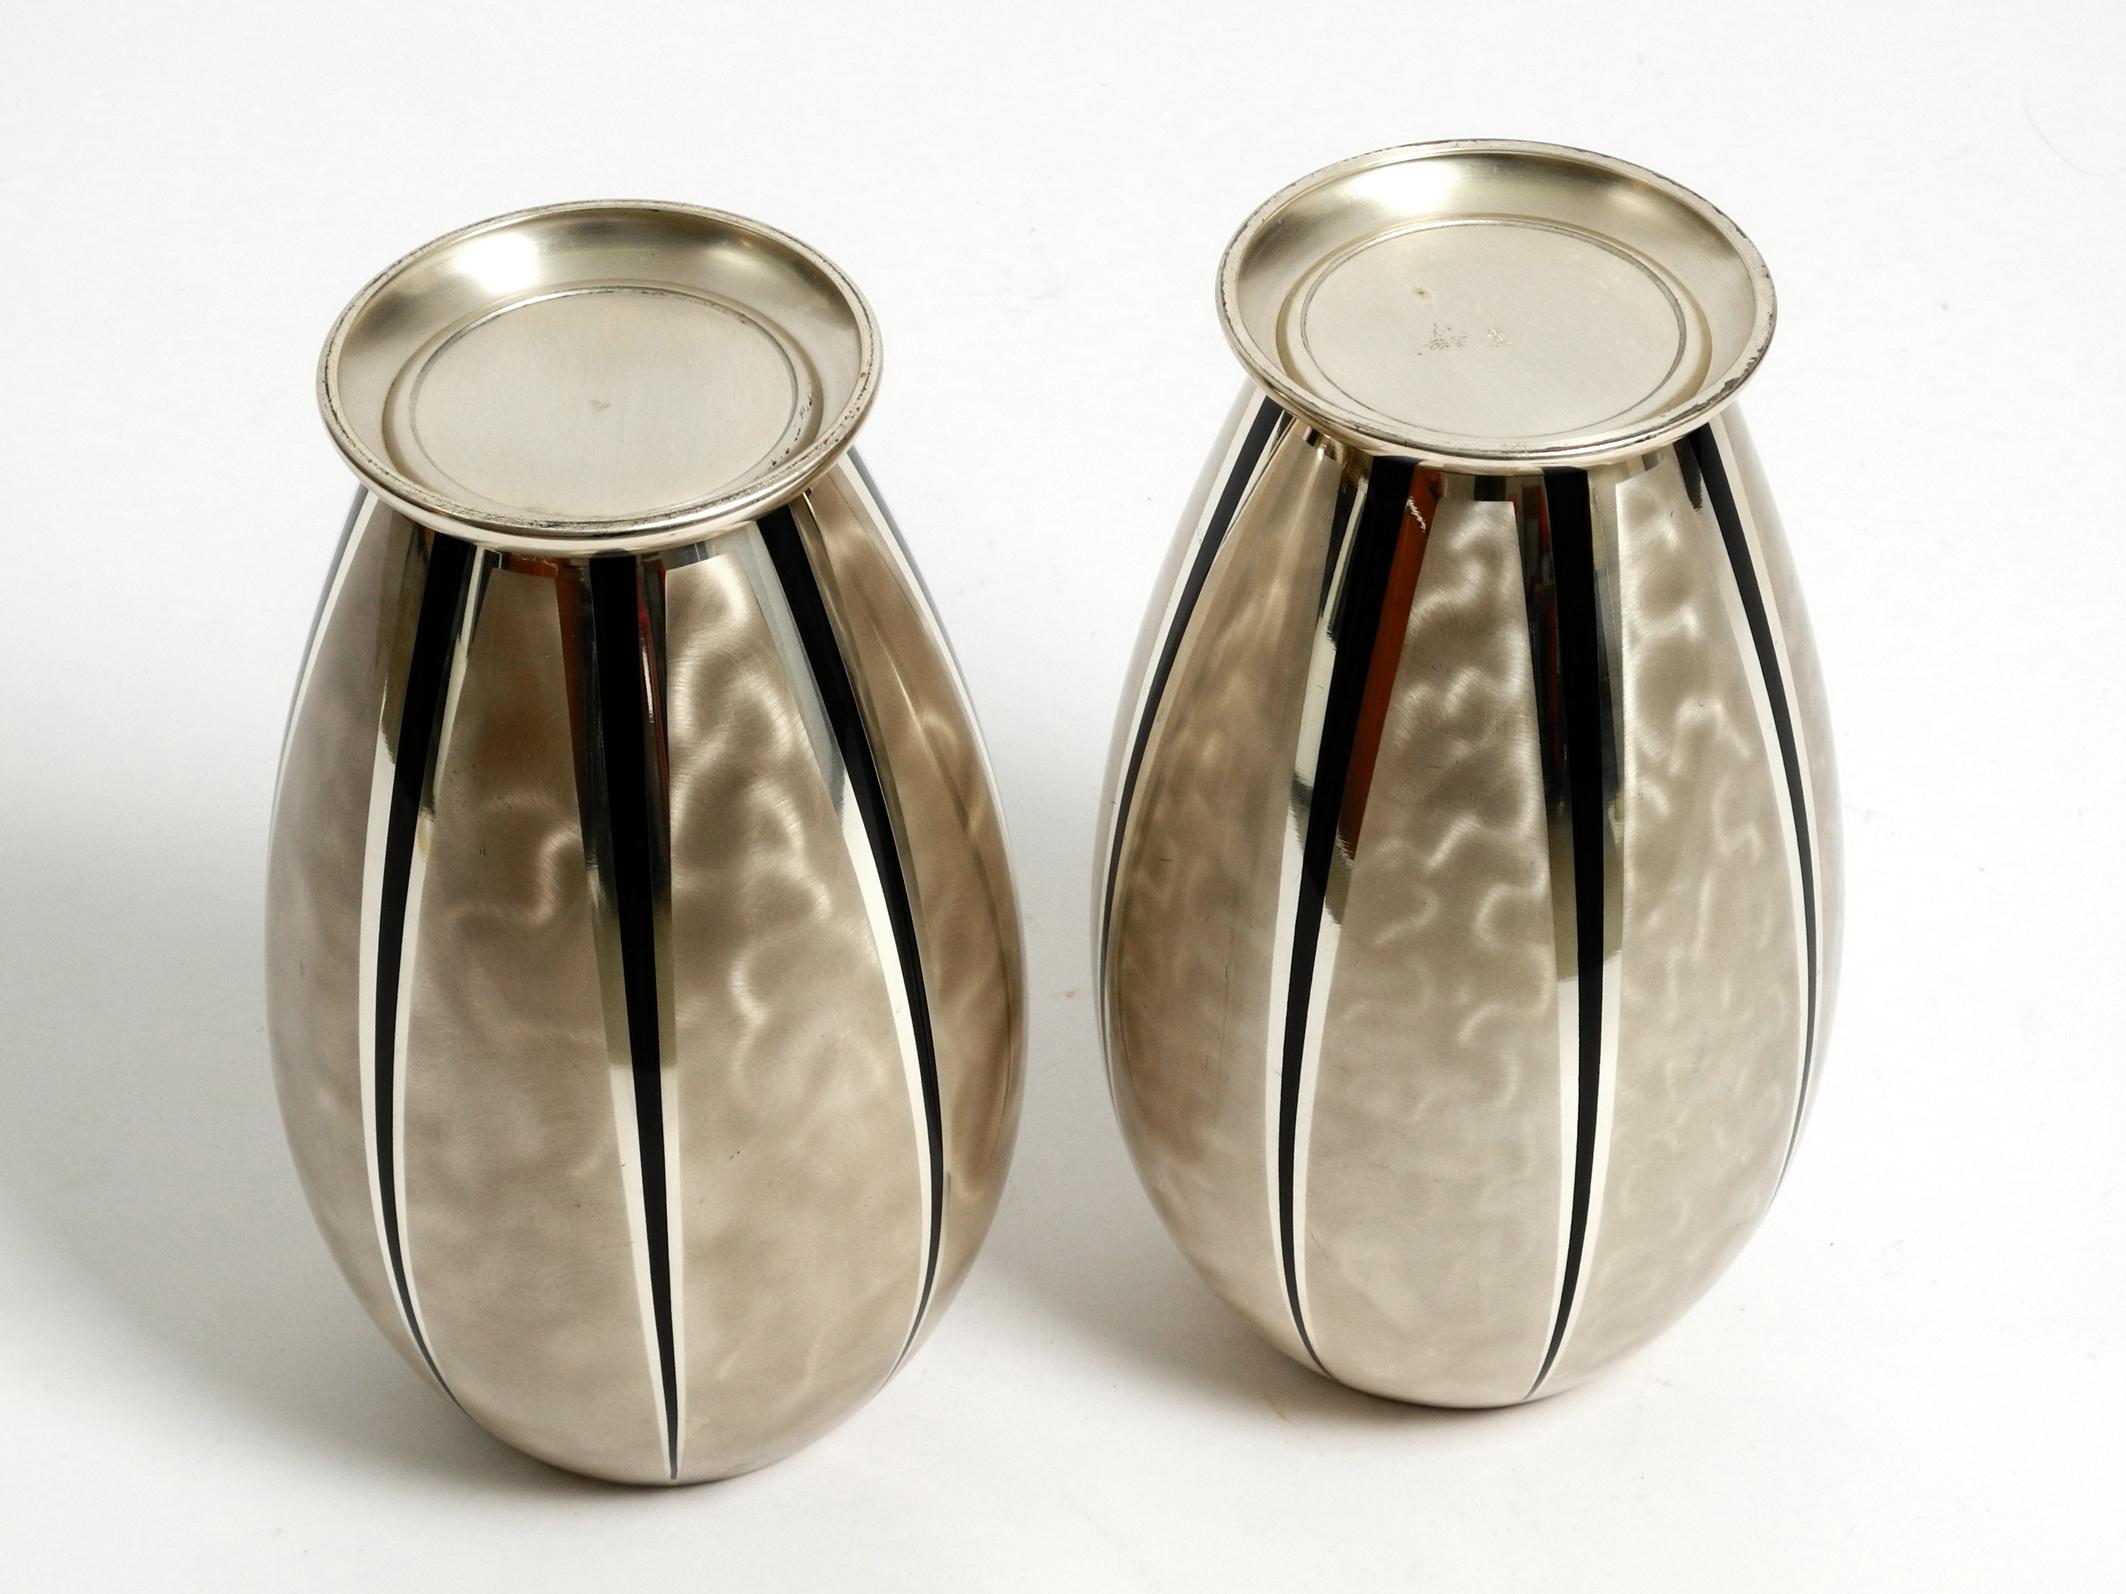 Pair of Mid Century Modern WMF Ikora table vases made of silver-plated brass For Sale 6